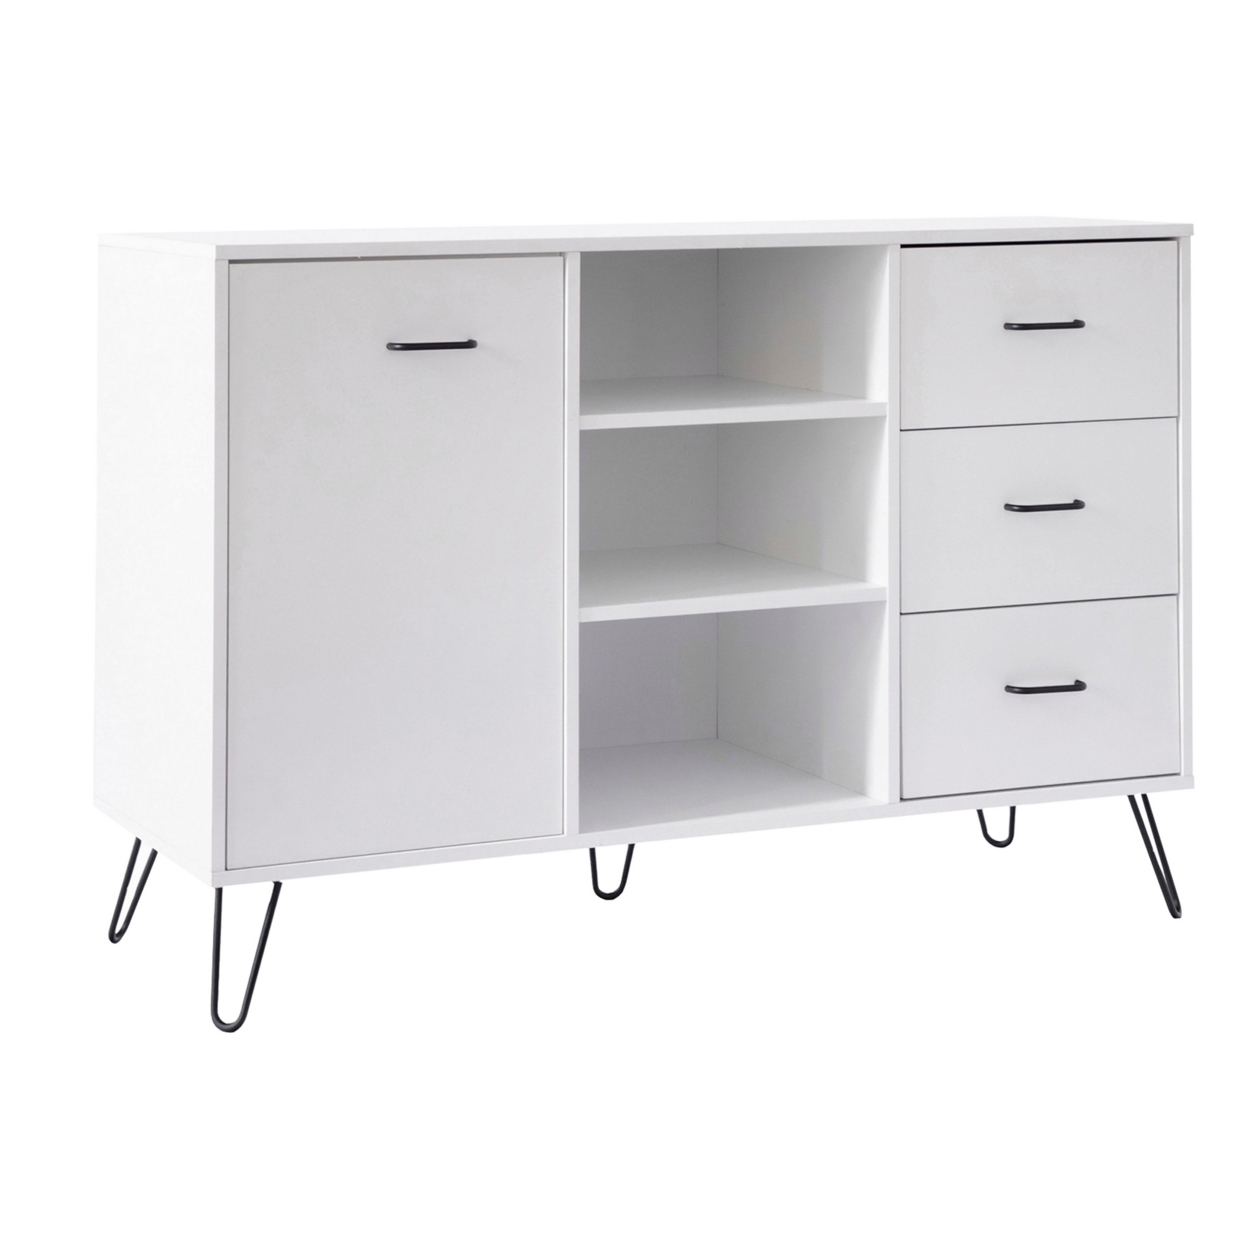 49 Inch Sideboard Buffet Console Cabinet With 3 Drawers, White, Saltoro Sherpi